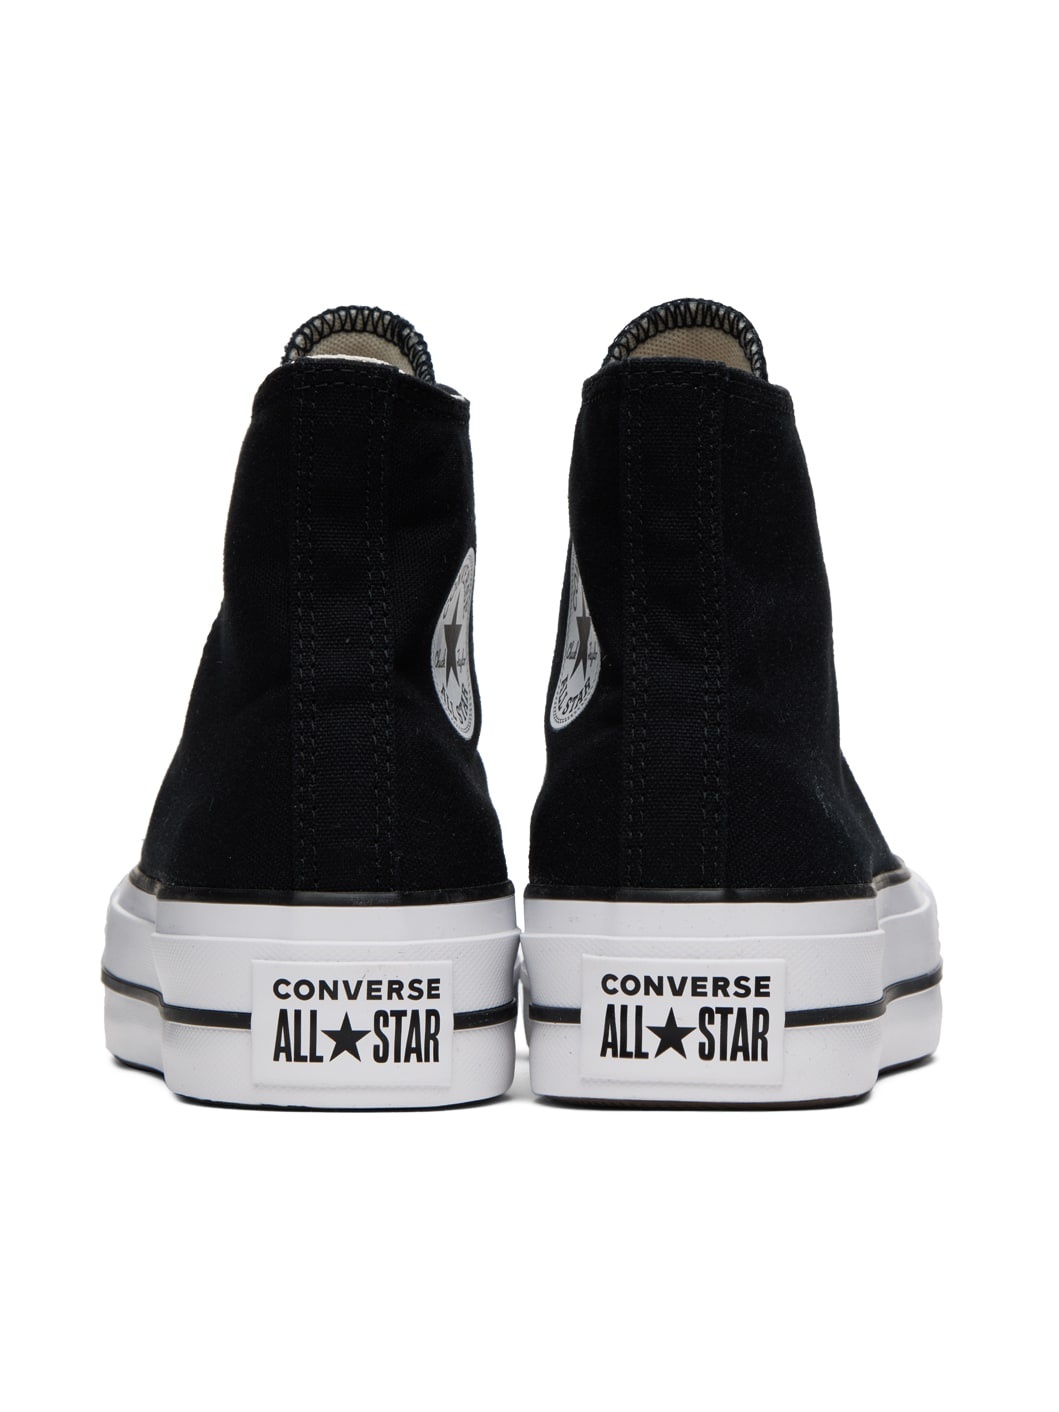 Black Chuck Taylor All Star Sneakers - 2